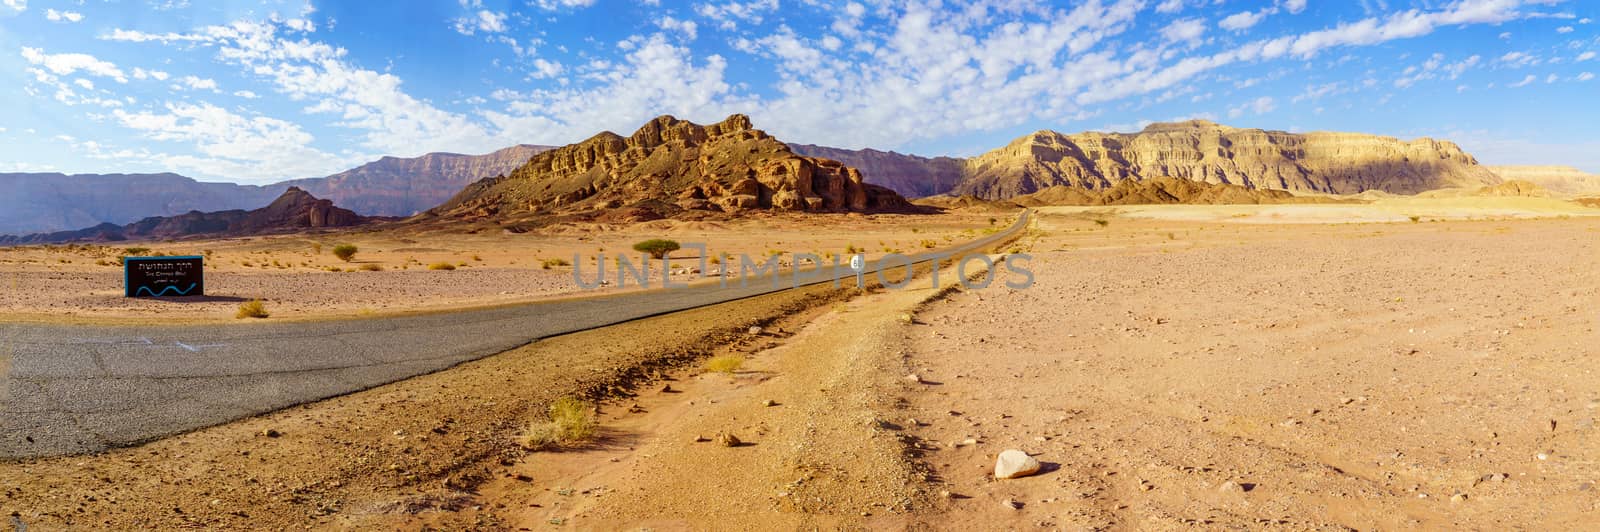 Landscape and the Copper Road, in the Timna Valley by RnDmS